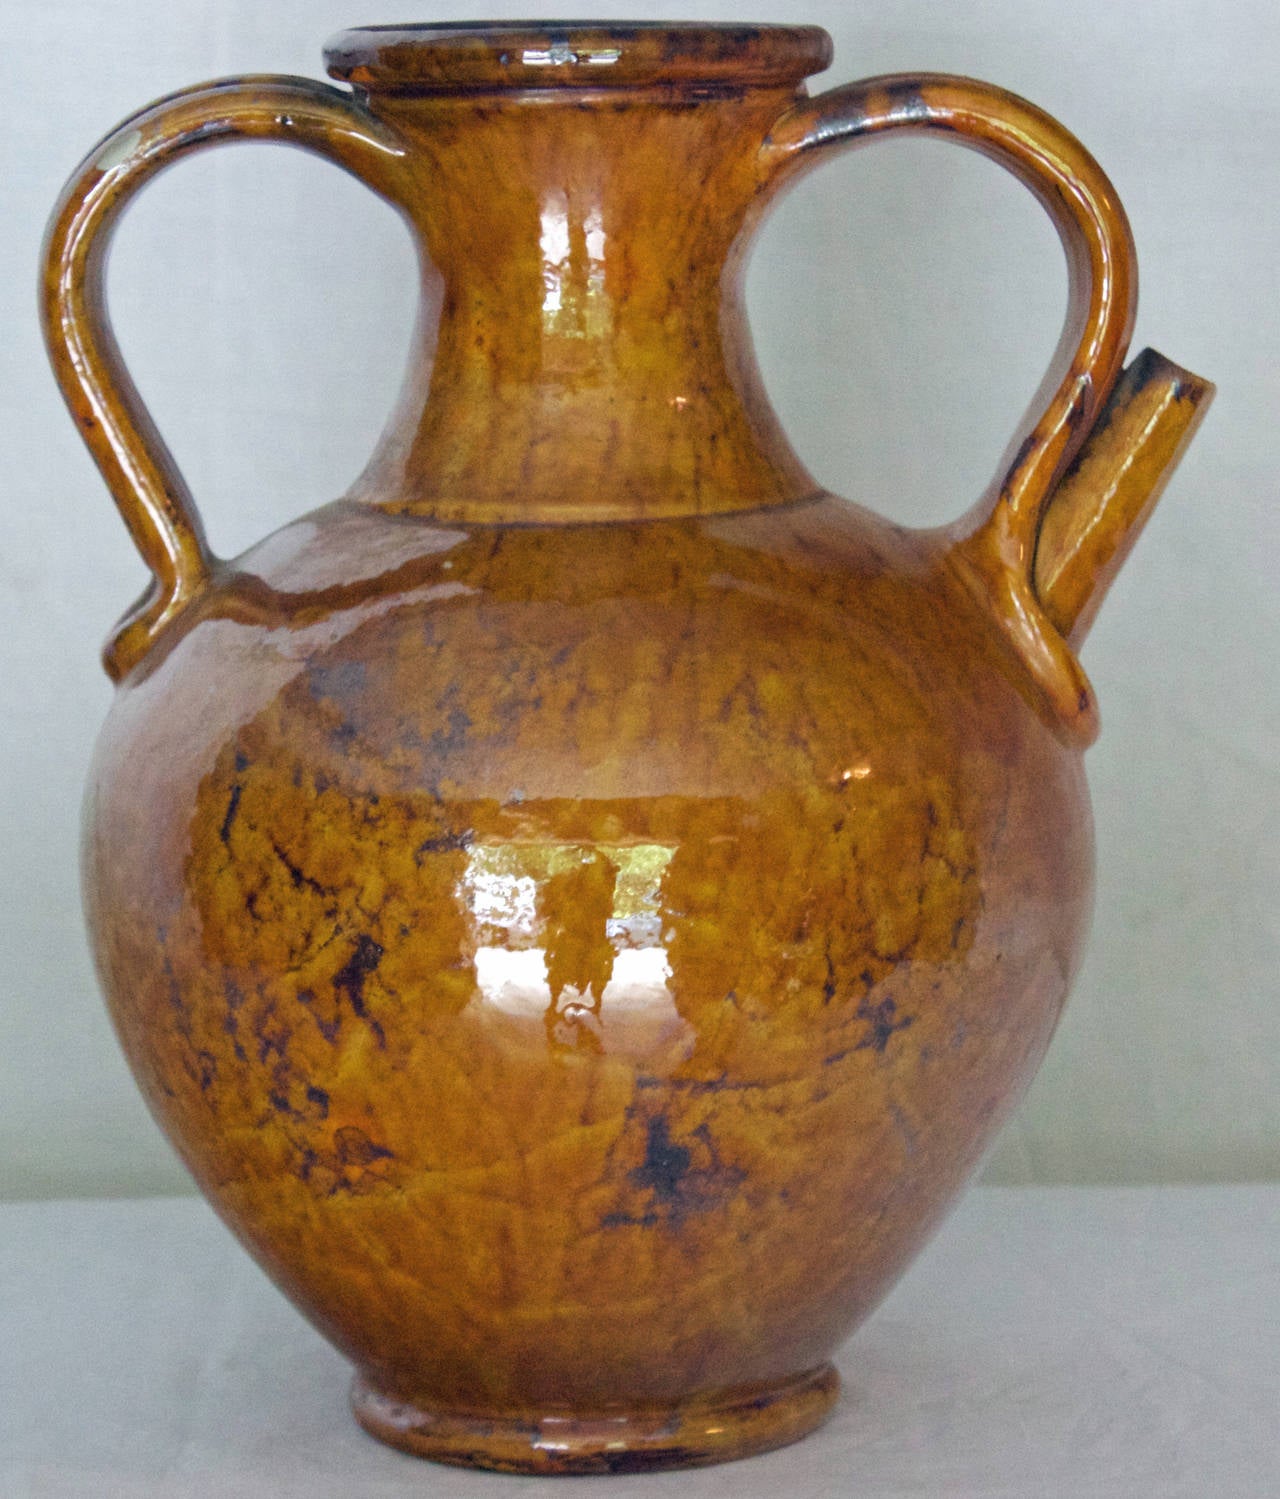 This rare and very decorative water jug was made in the village of biot which has been a pottery center still operating today since 18th century and its name given by the locals is 